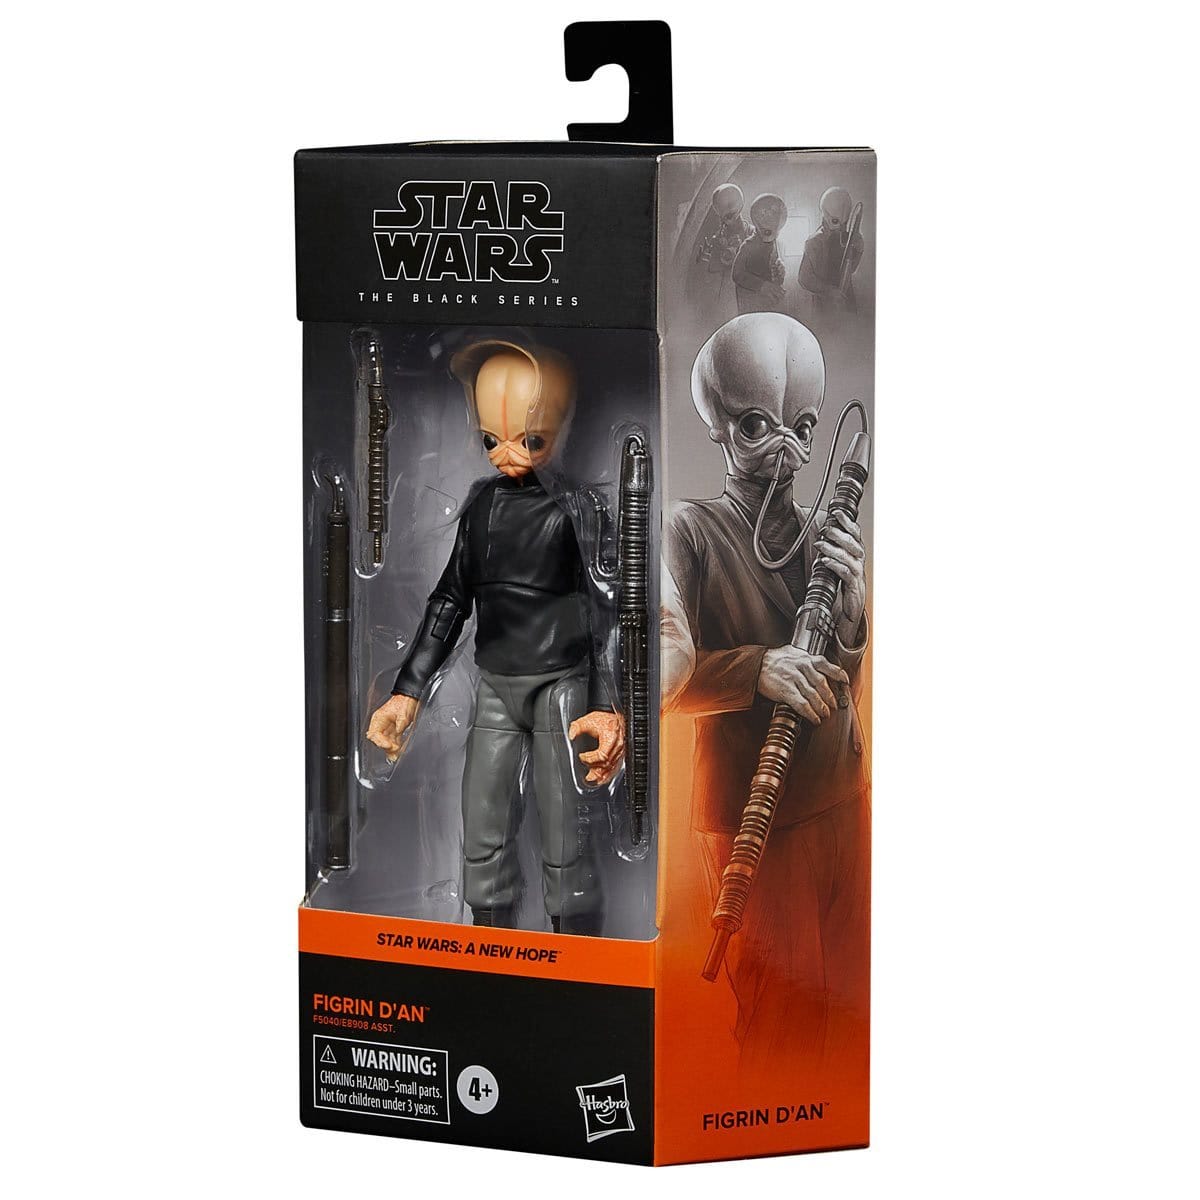 Star Wars The Black Series Figrin D'an 6" Action Figure Pop-O-Loco